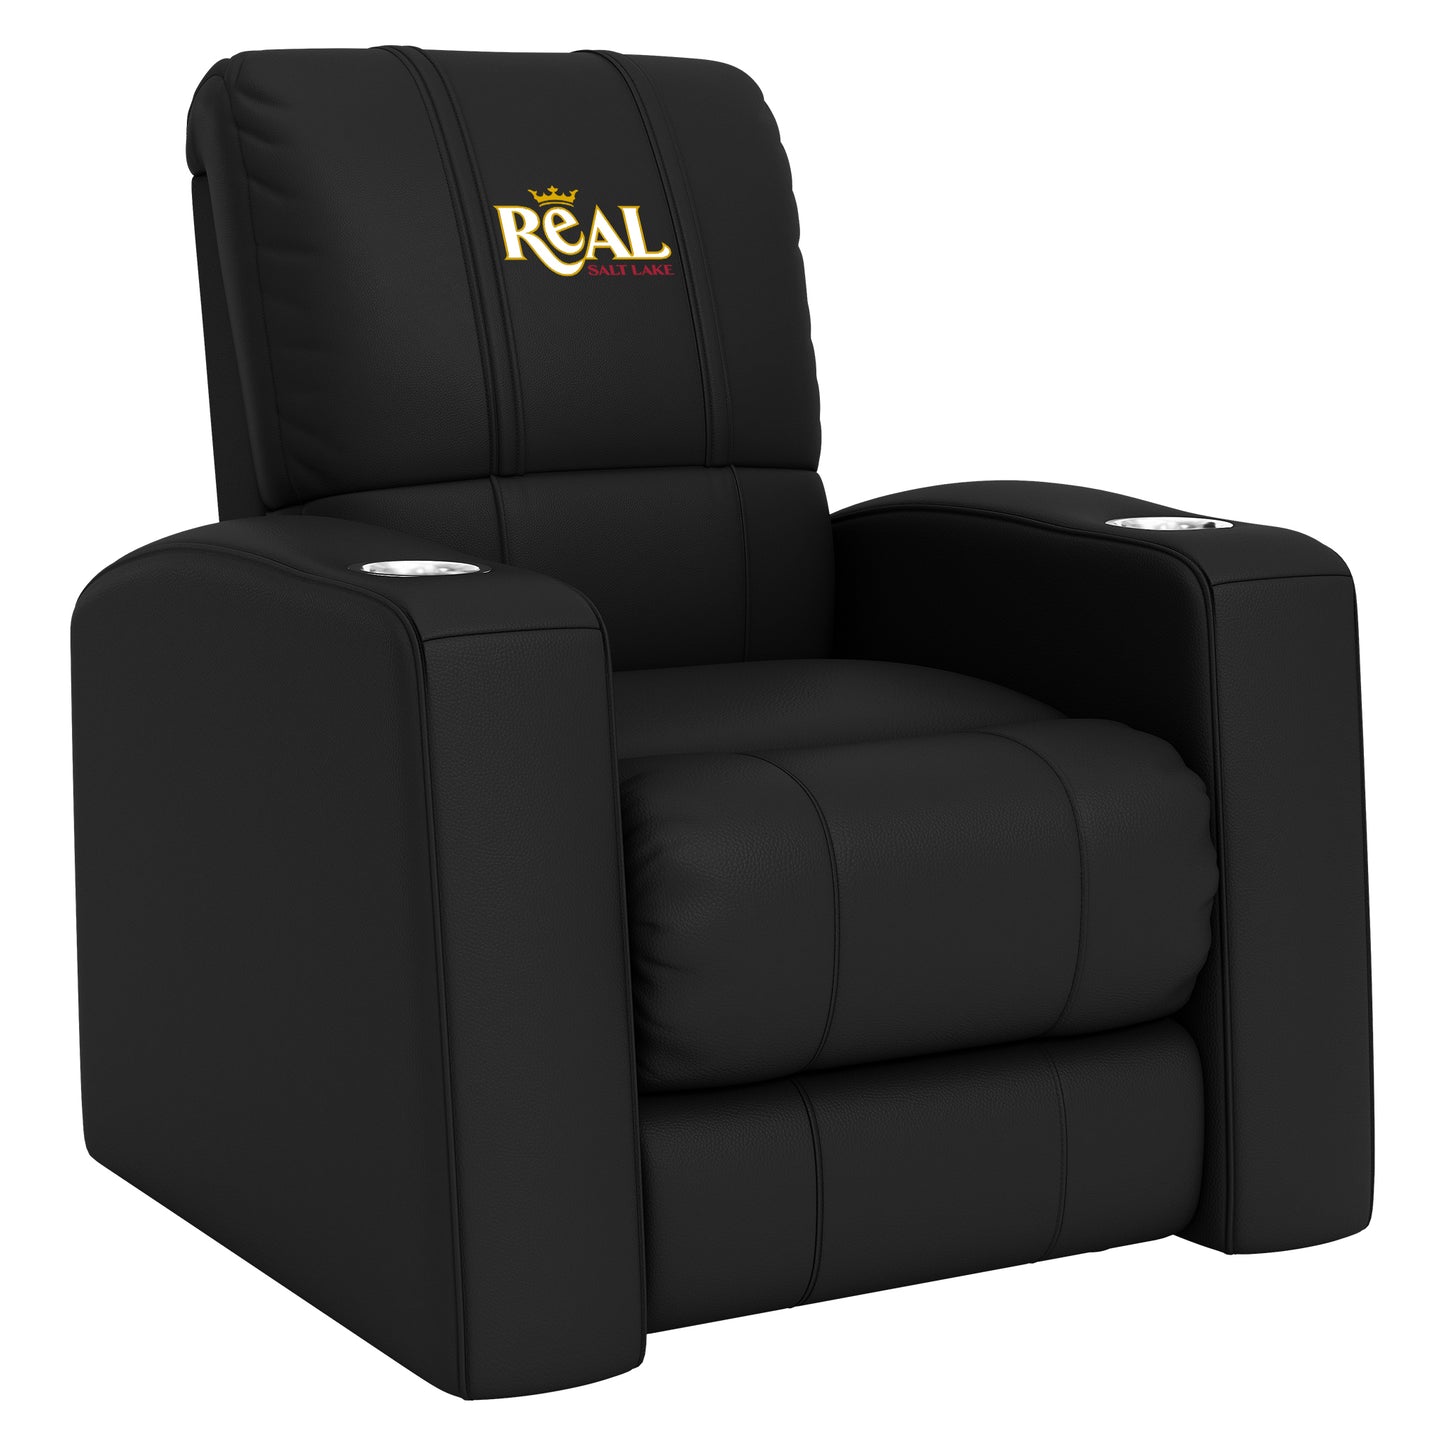 Relax Home Theater Recliner with Real Salt Lake Wordmark Logo